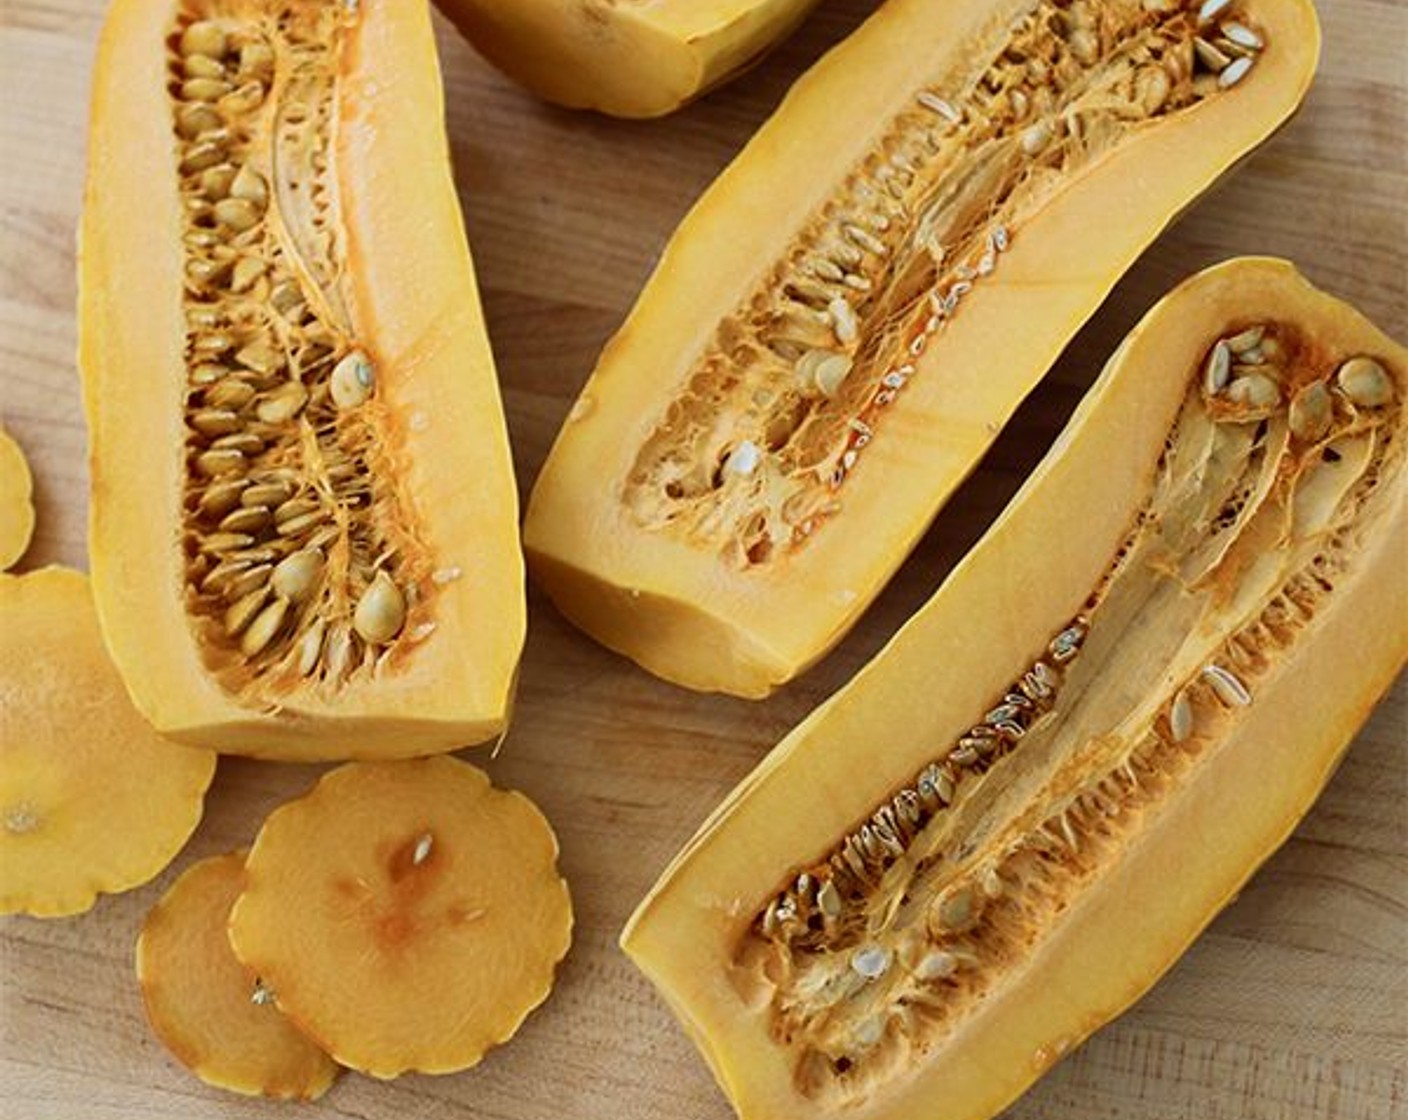 step 2 Trim both ends of the Delicata Squash (6 1/2 cups) and cut the squash in half lengthwise. Scoop out the seeds and discard. Slice the squash crosswise into ½-inch-thick pieces.